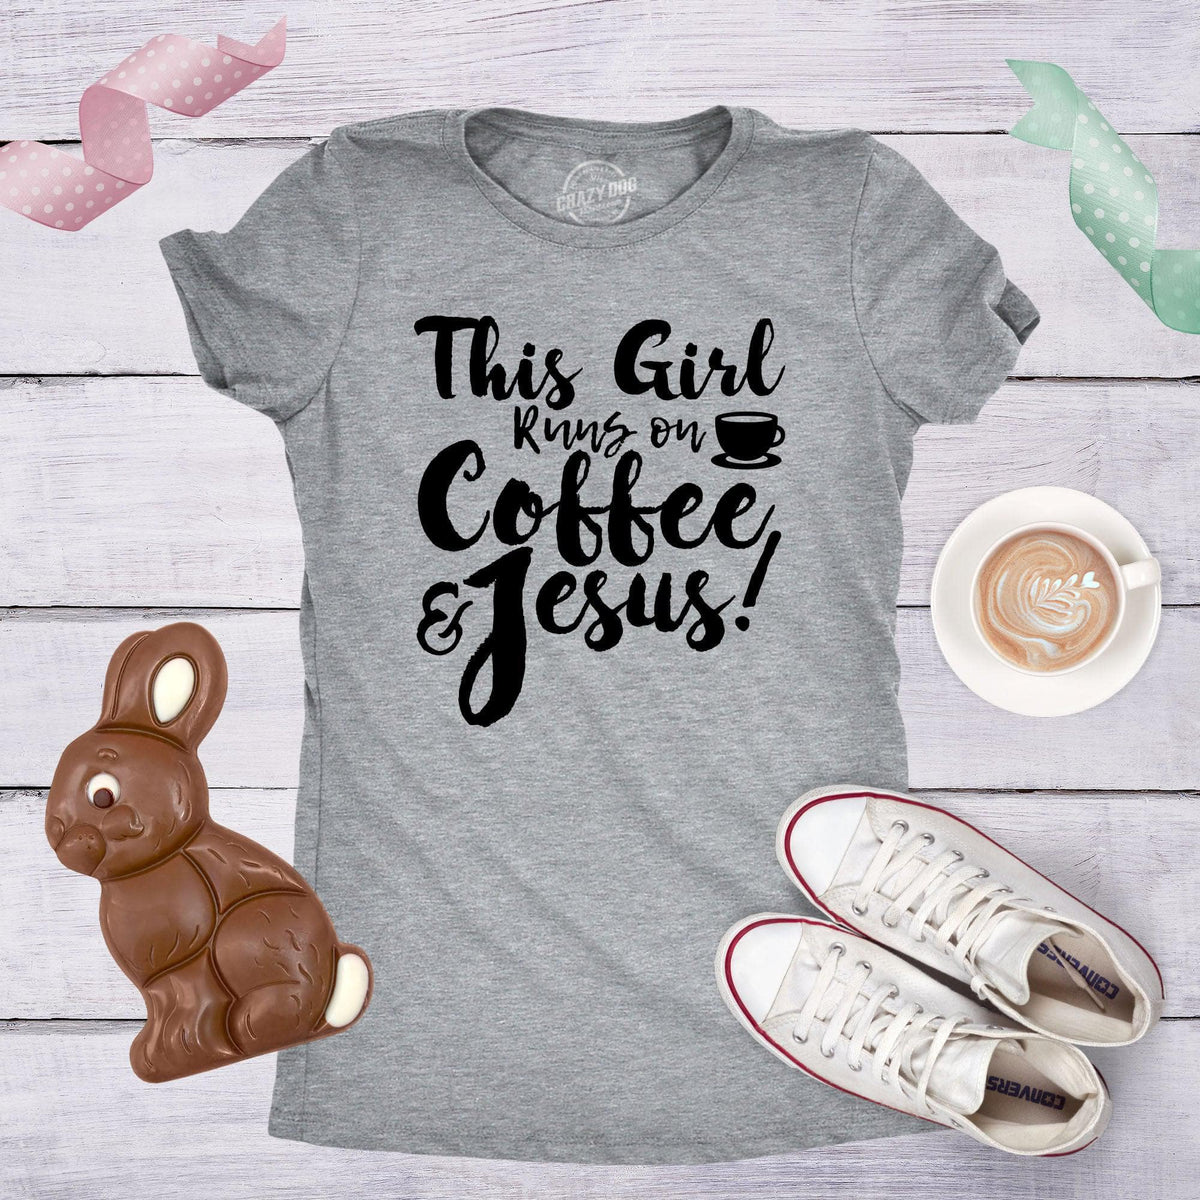 This Girl Runs Off Coffee And Jesus Women&#39;s Tshirt  -  Crazy Dog T-Shirts